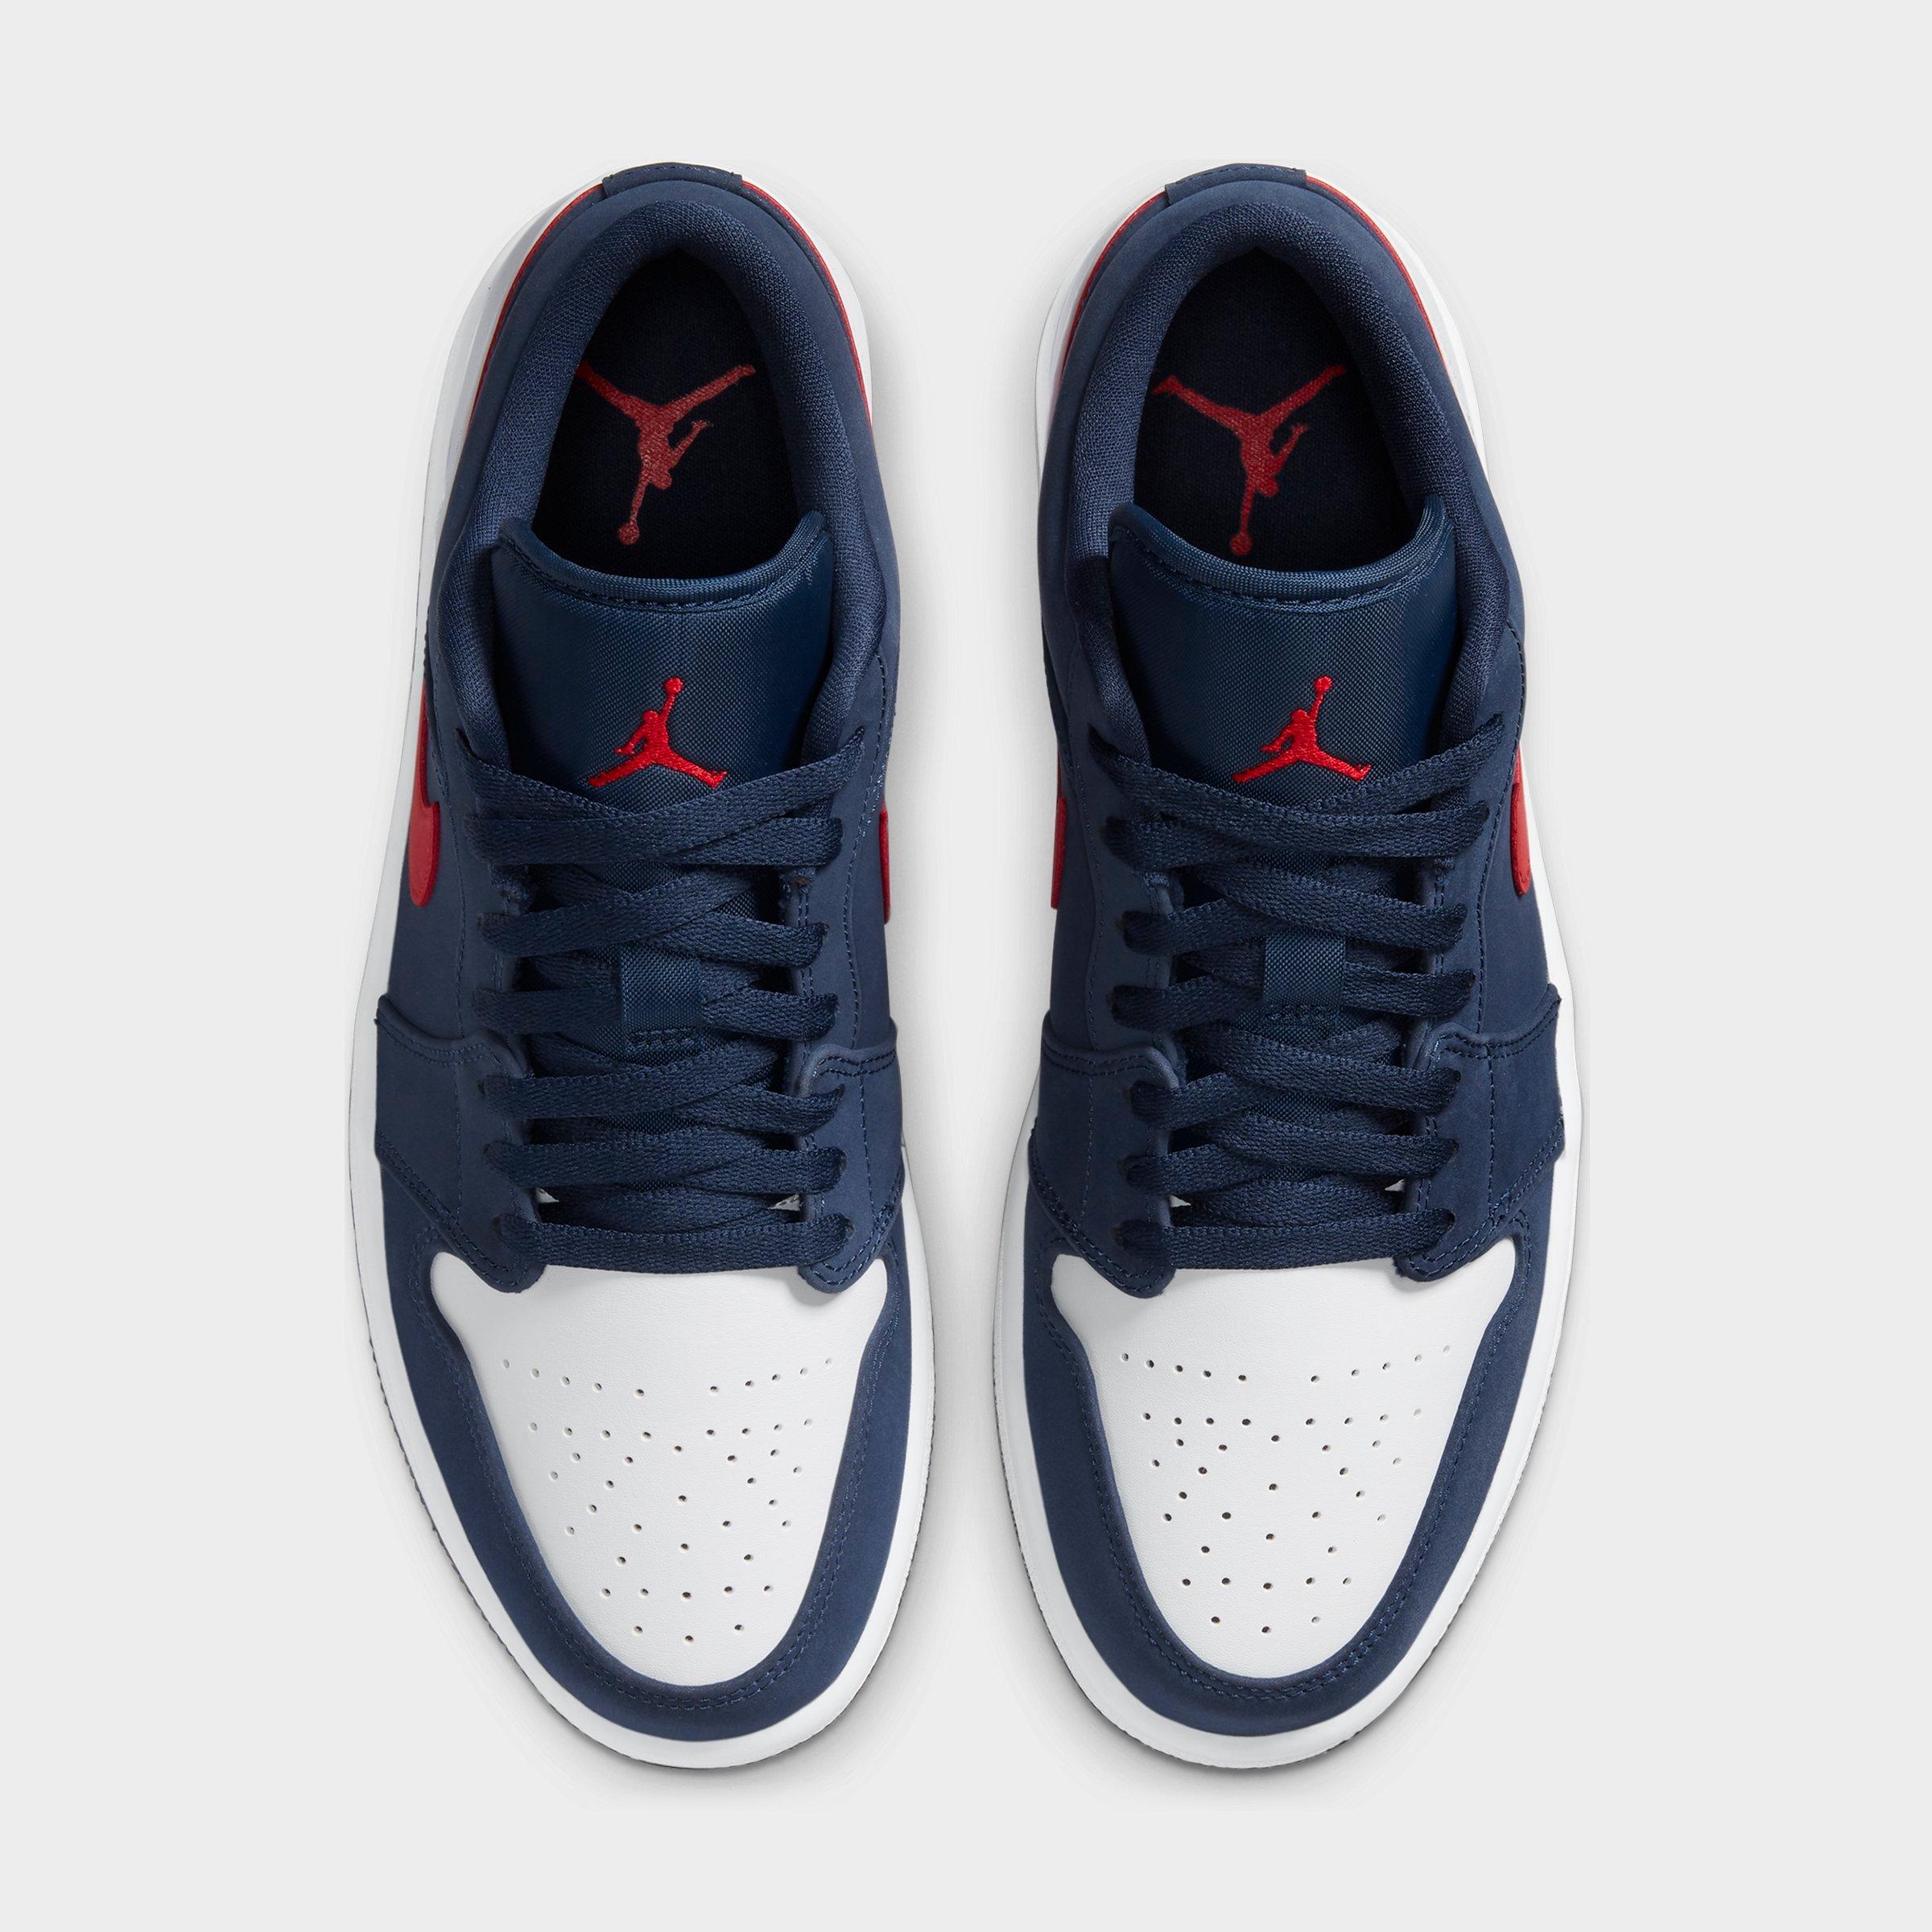 red white and blue retro 1